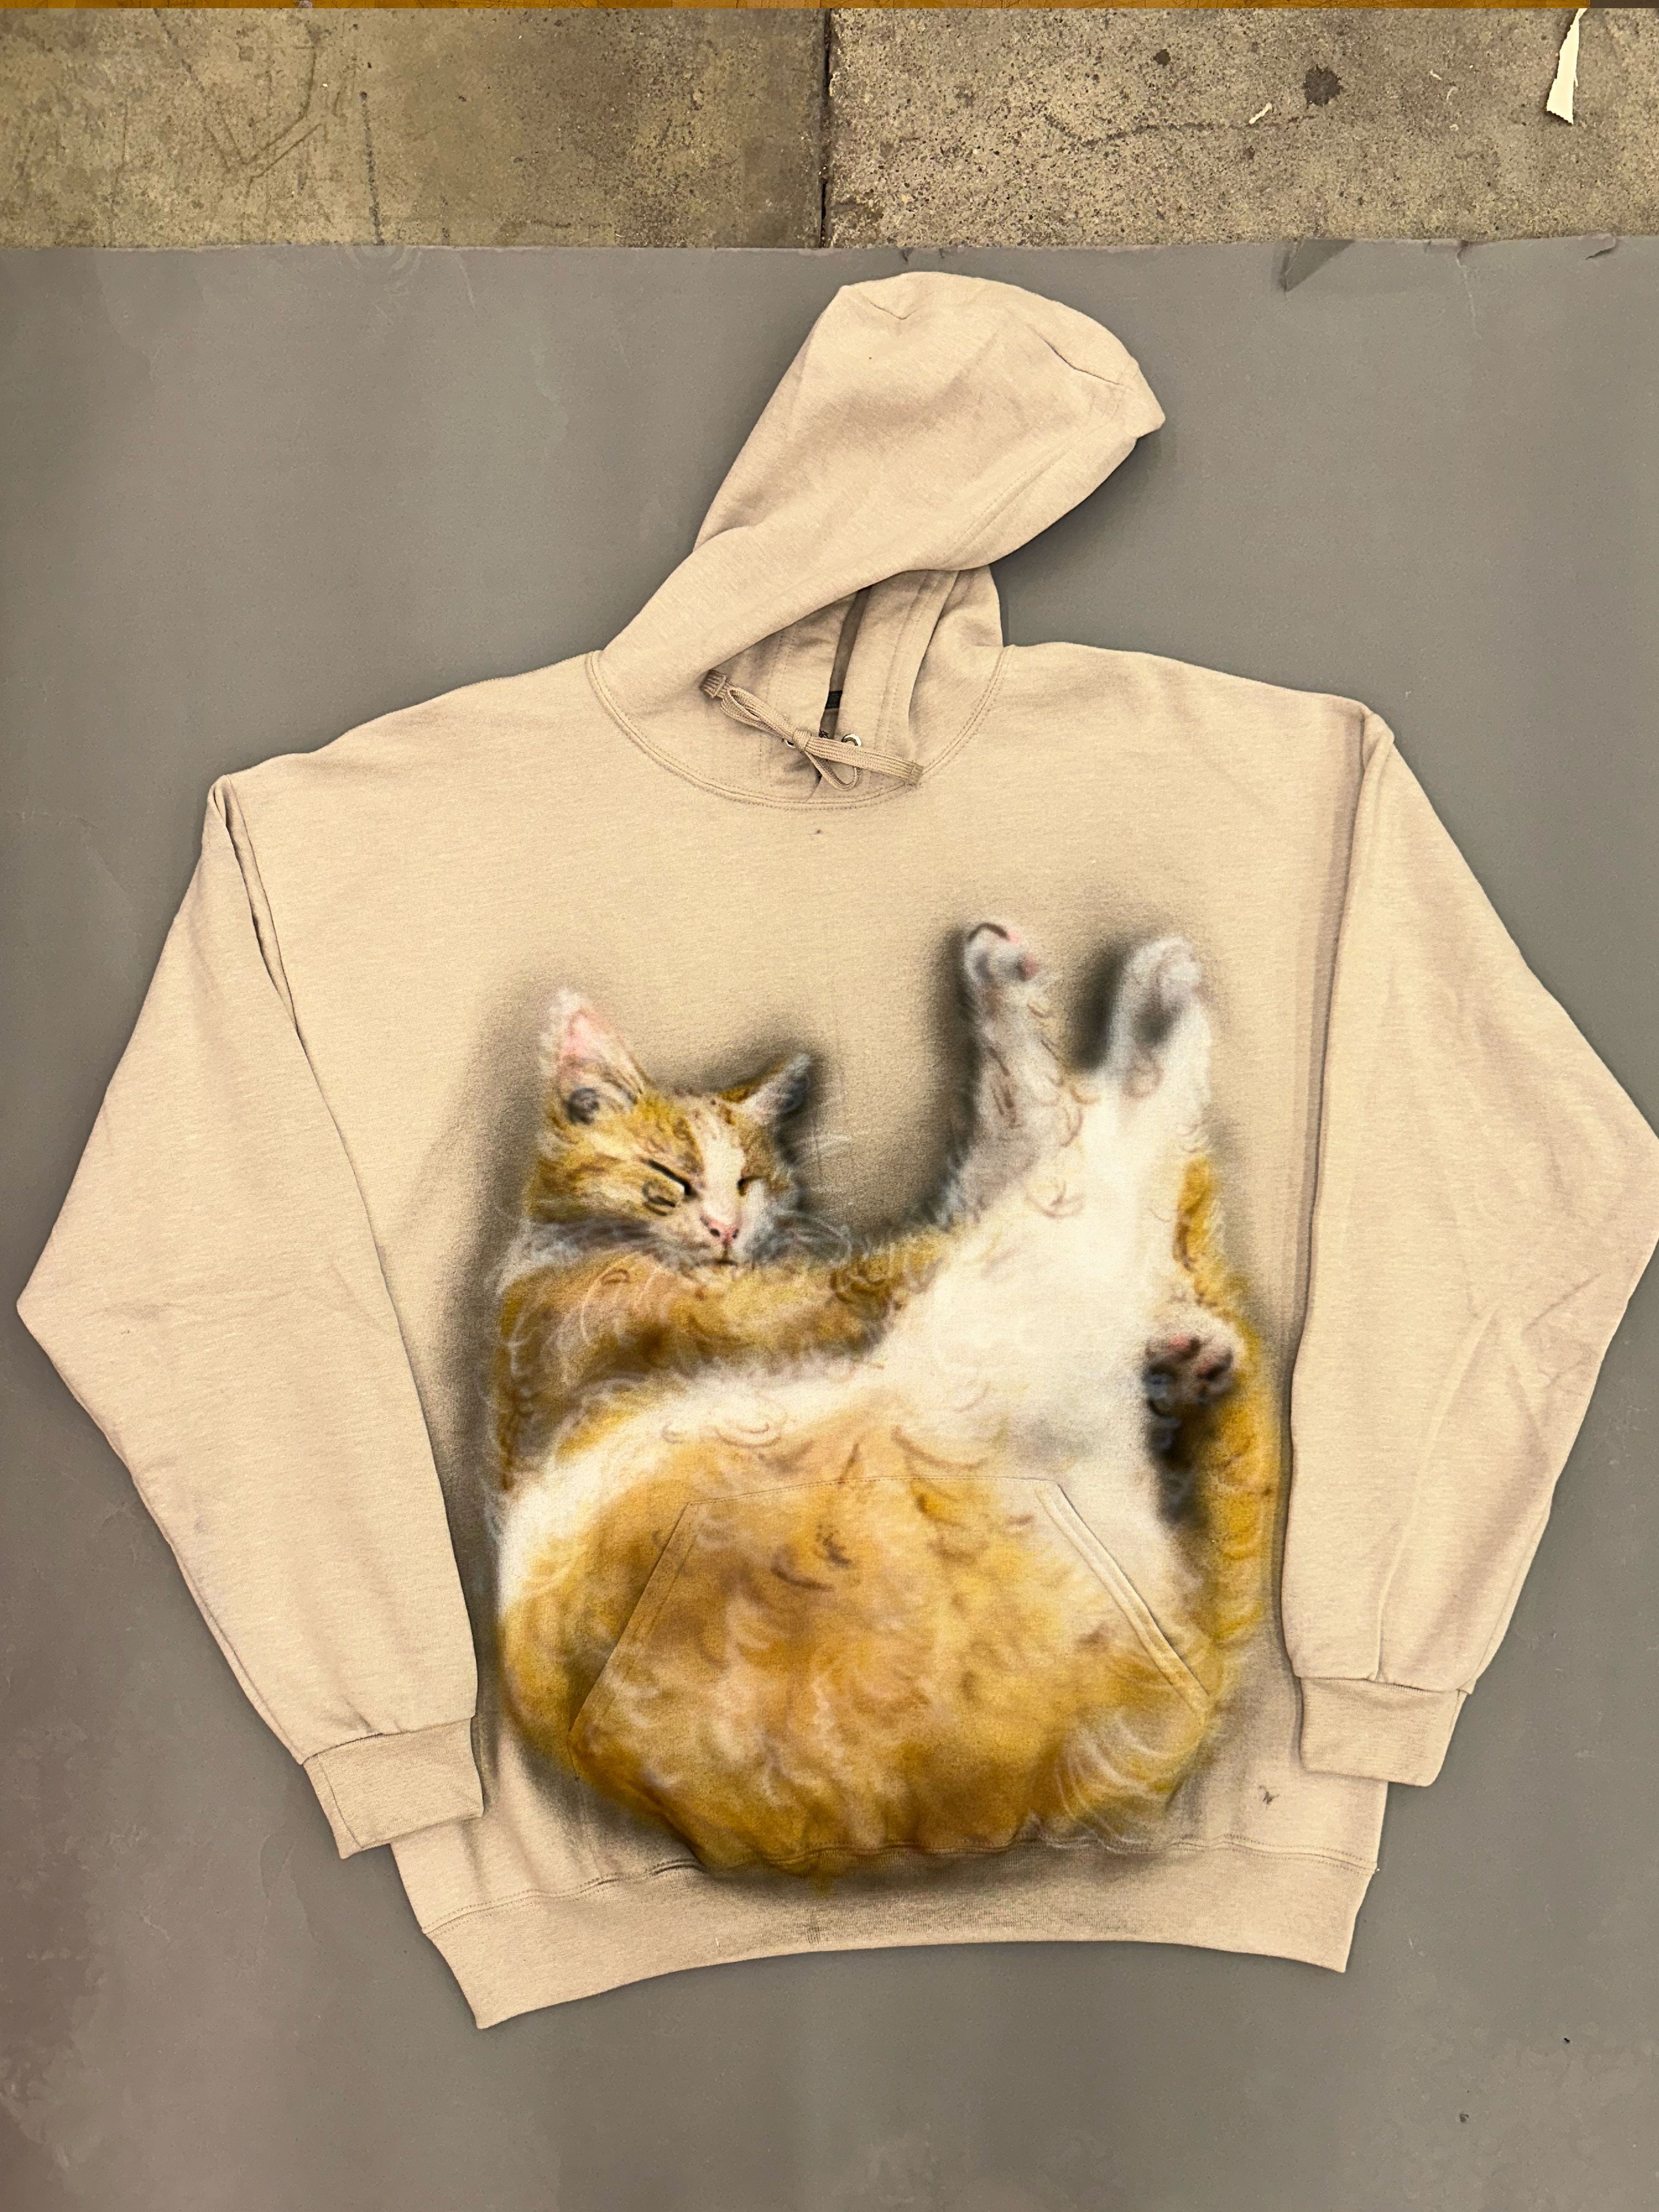 Commissioned Hoodie - Anything your heart desires